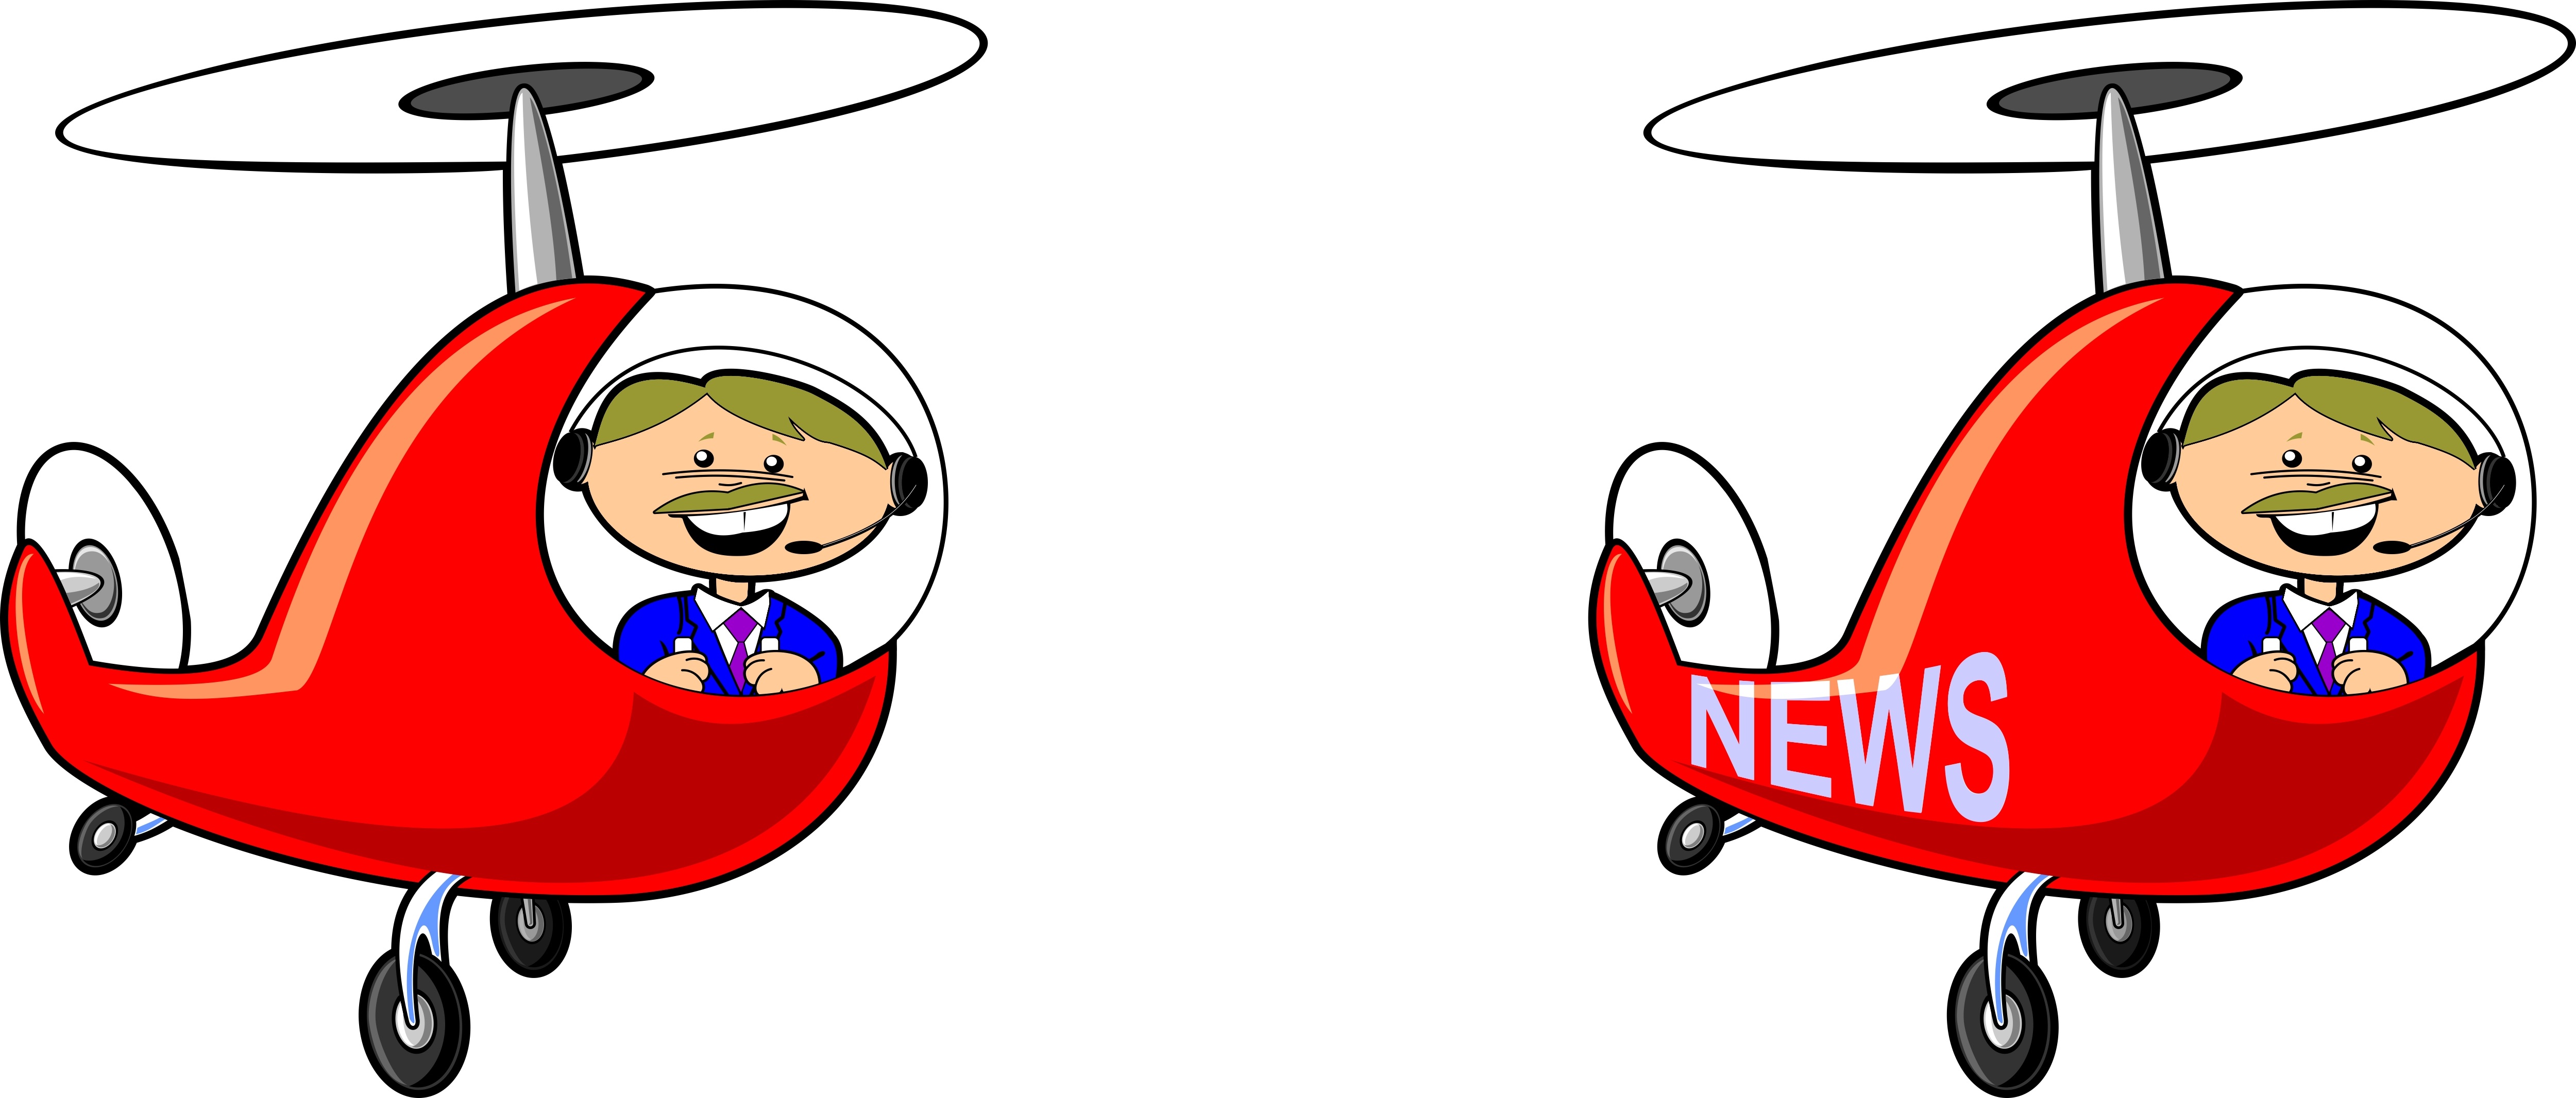 helicopter clipart news helicopter